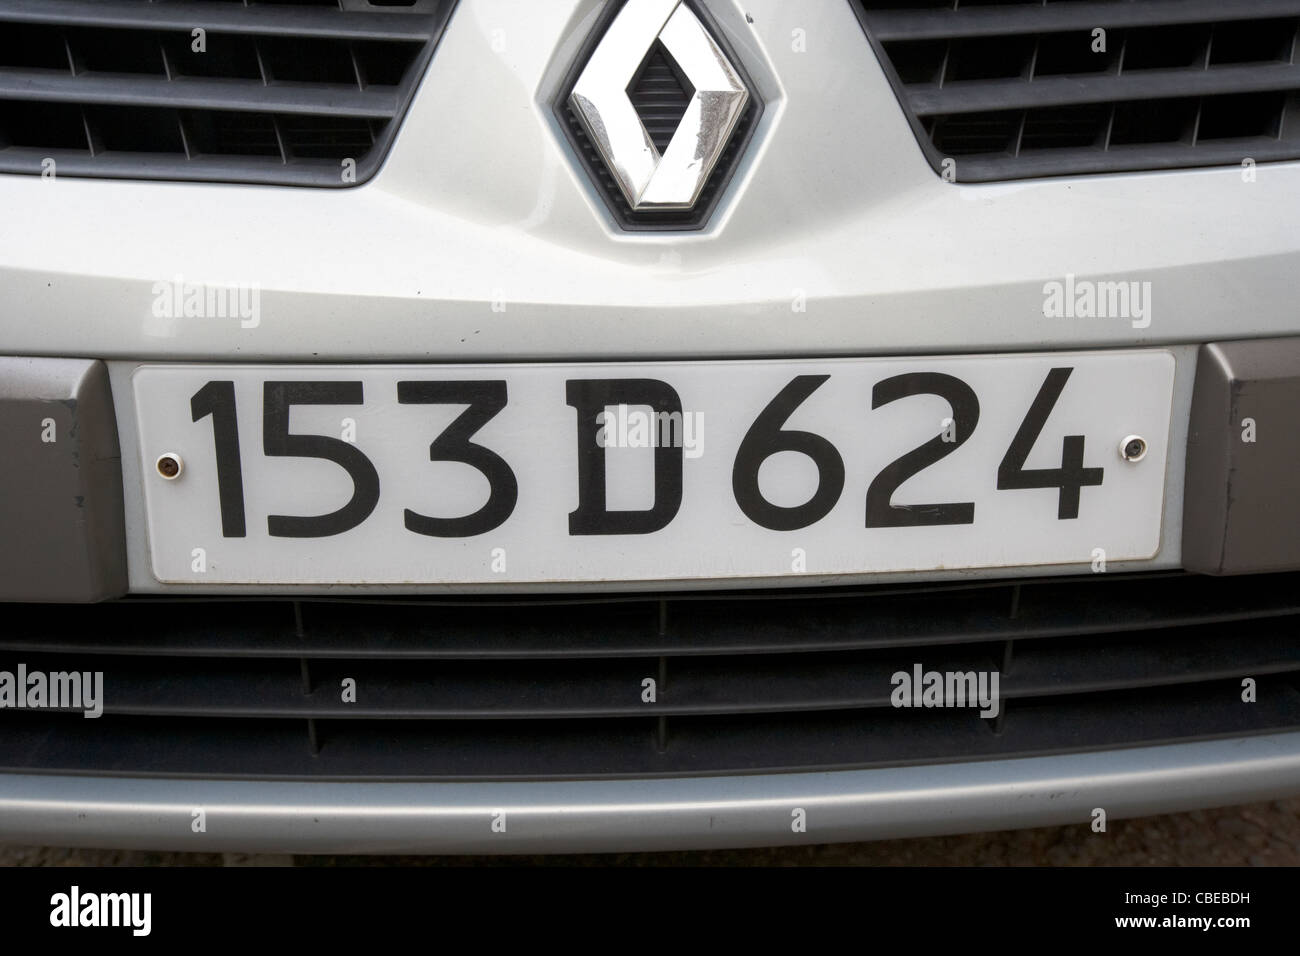 diplomatic plates on a french embassy car in london england uk united kingdom Stock Photo